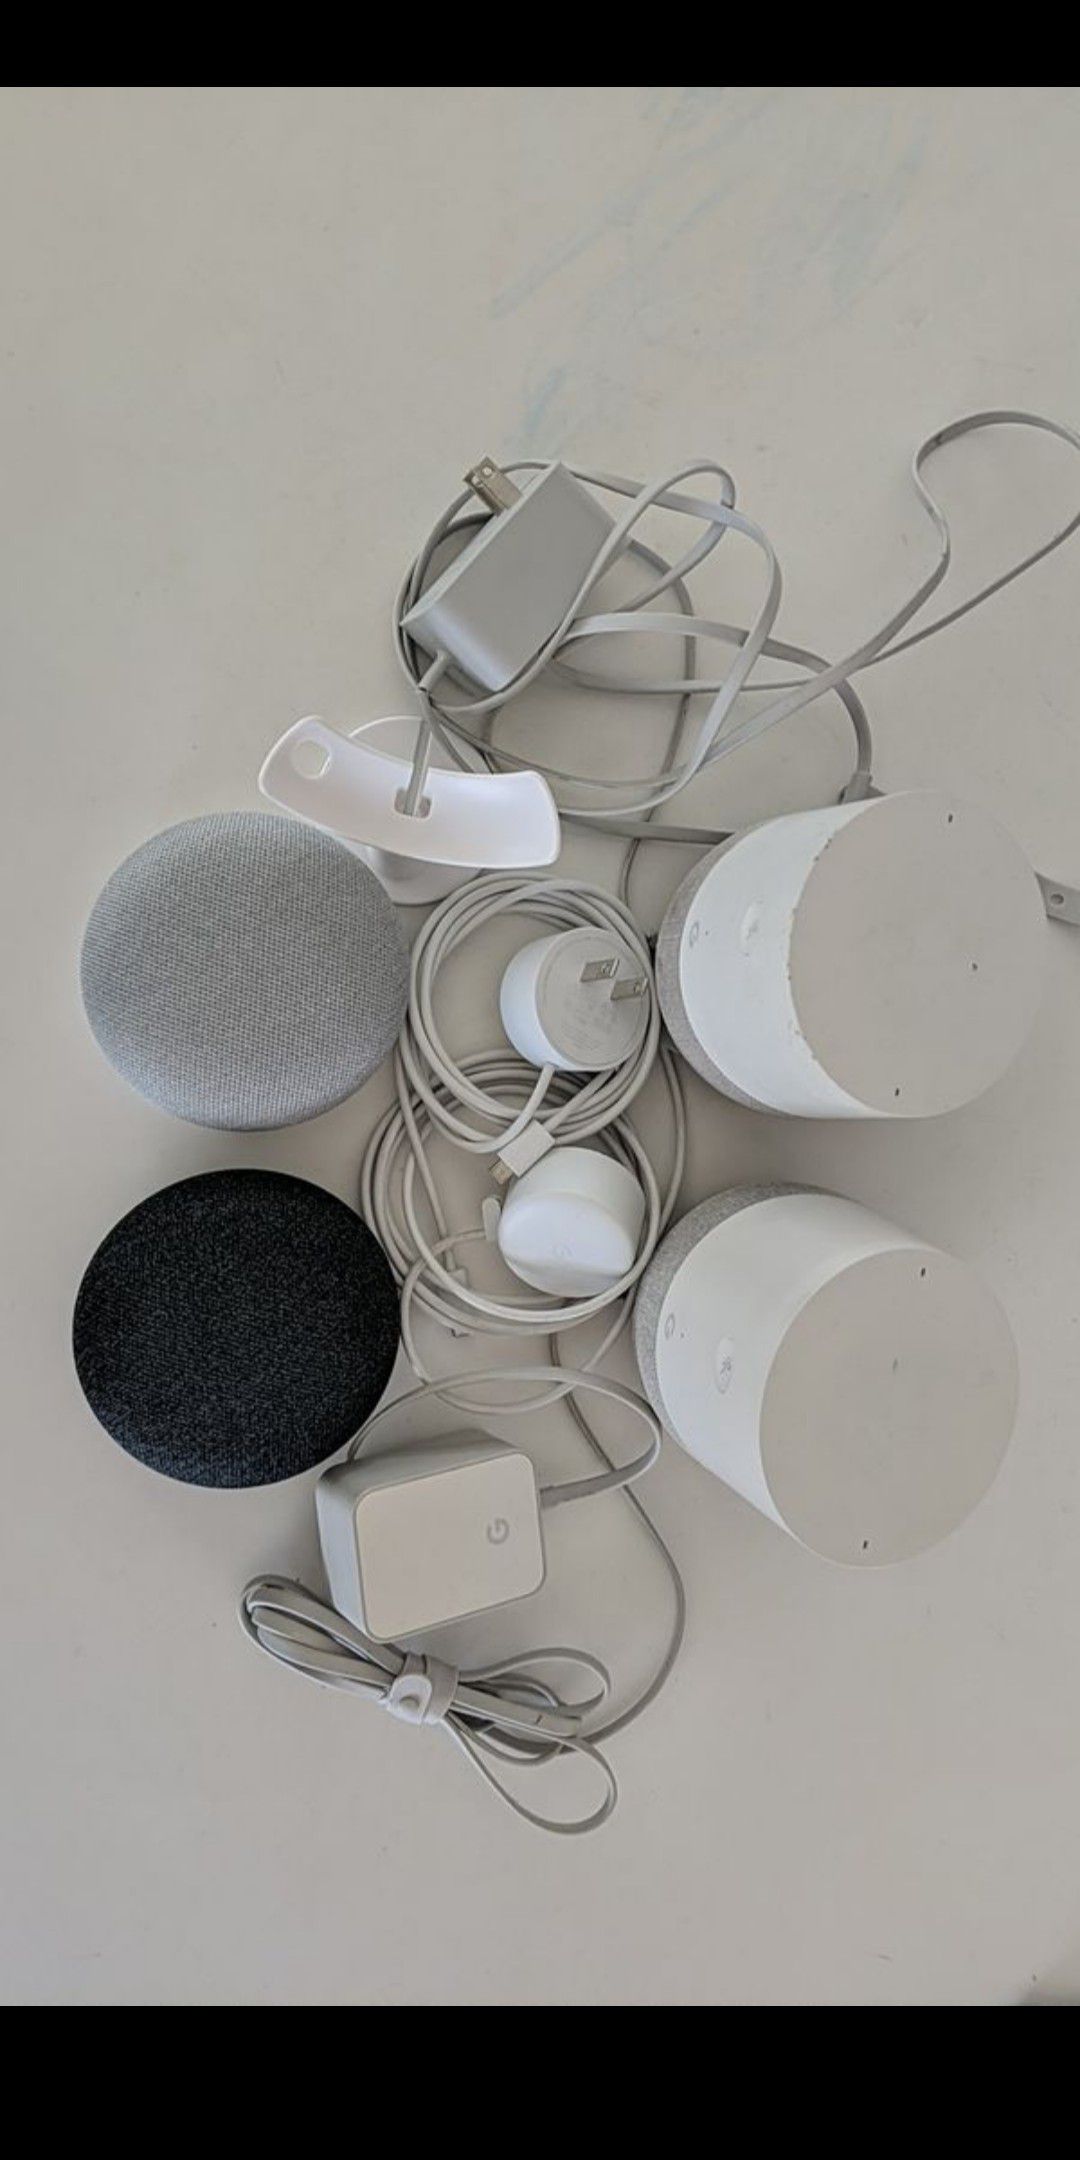 4 google home devices